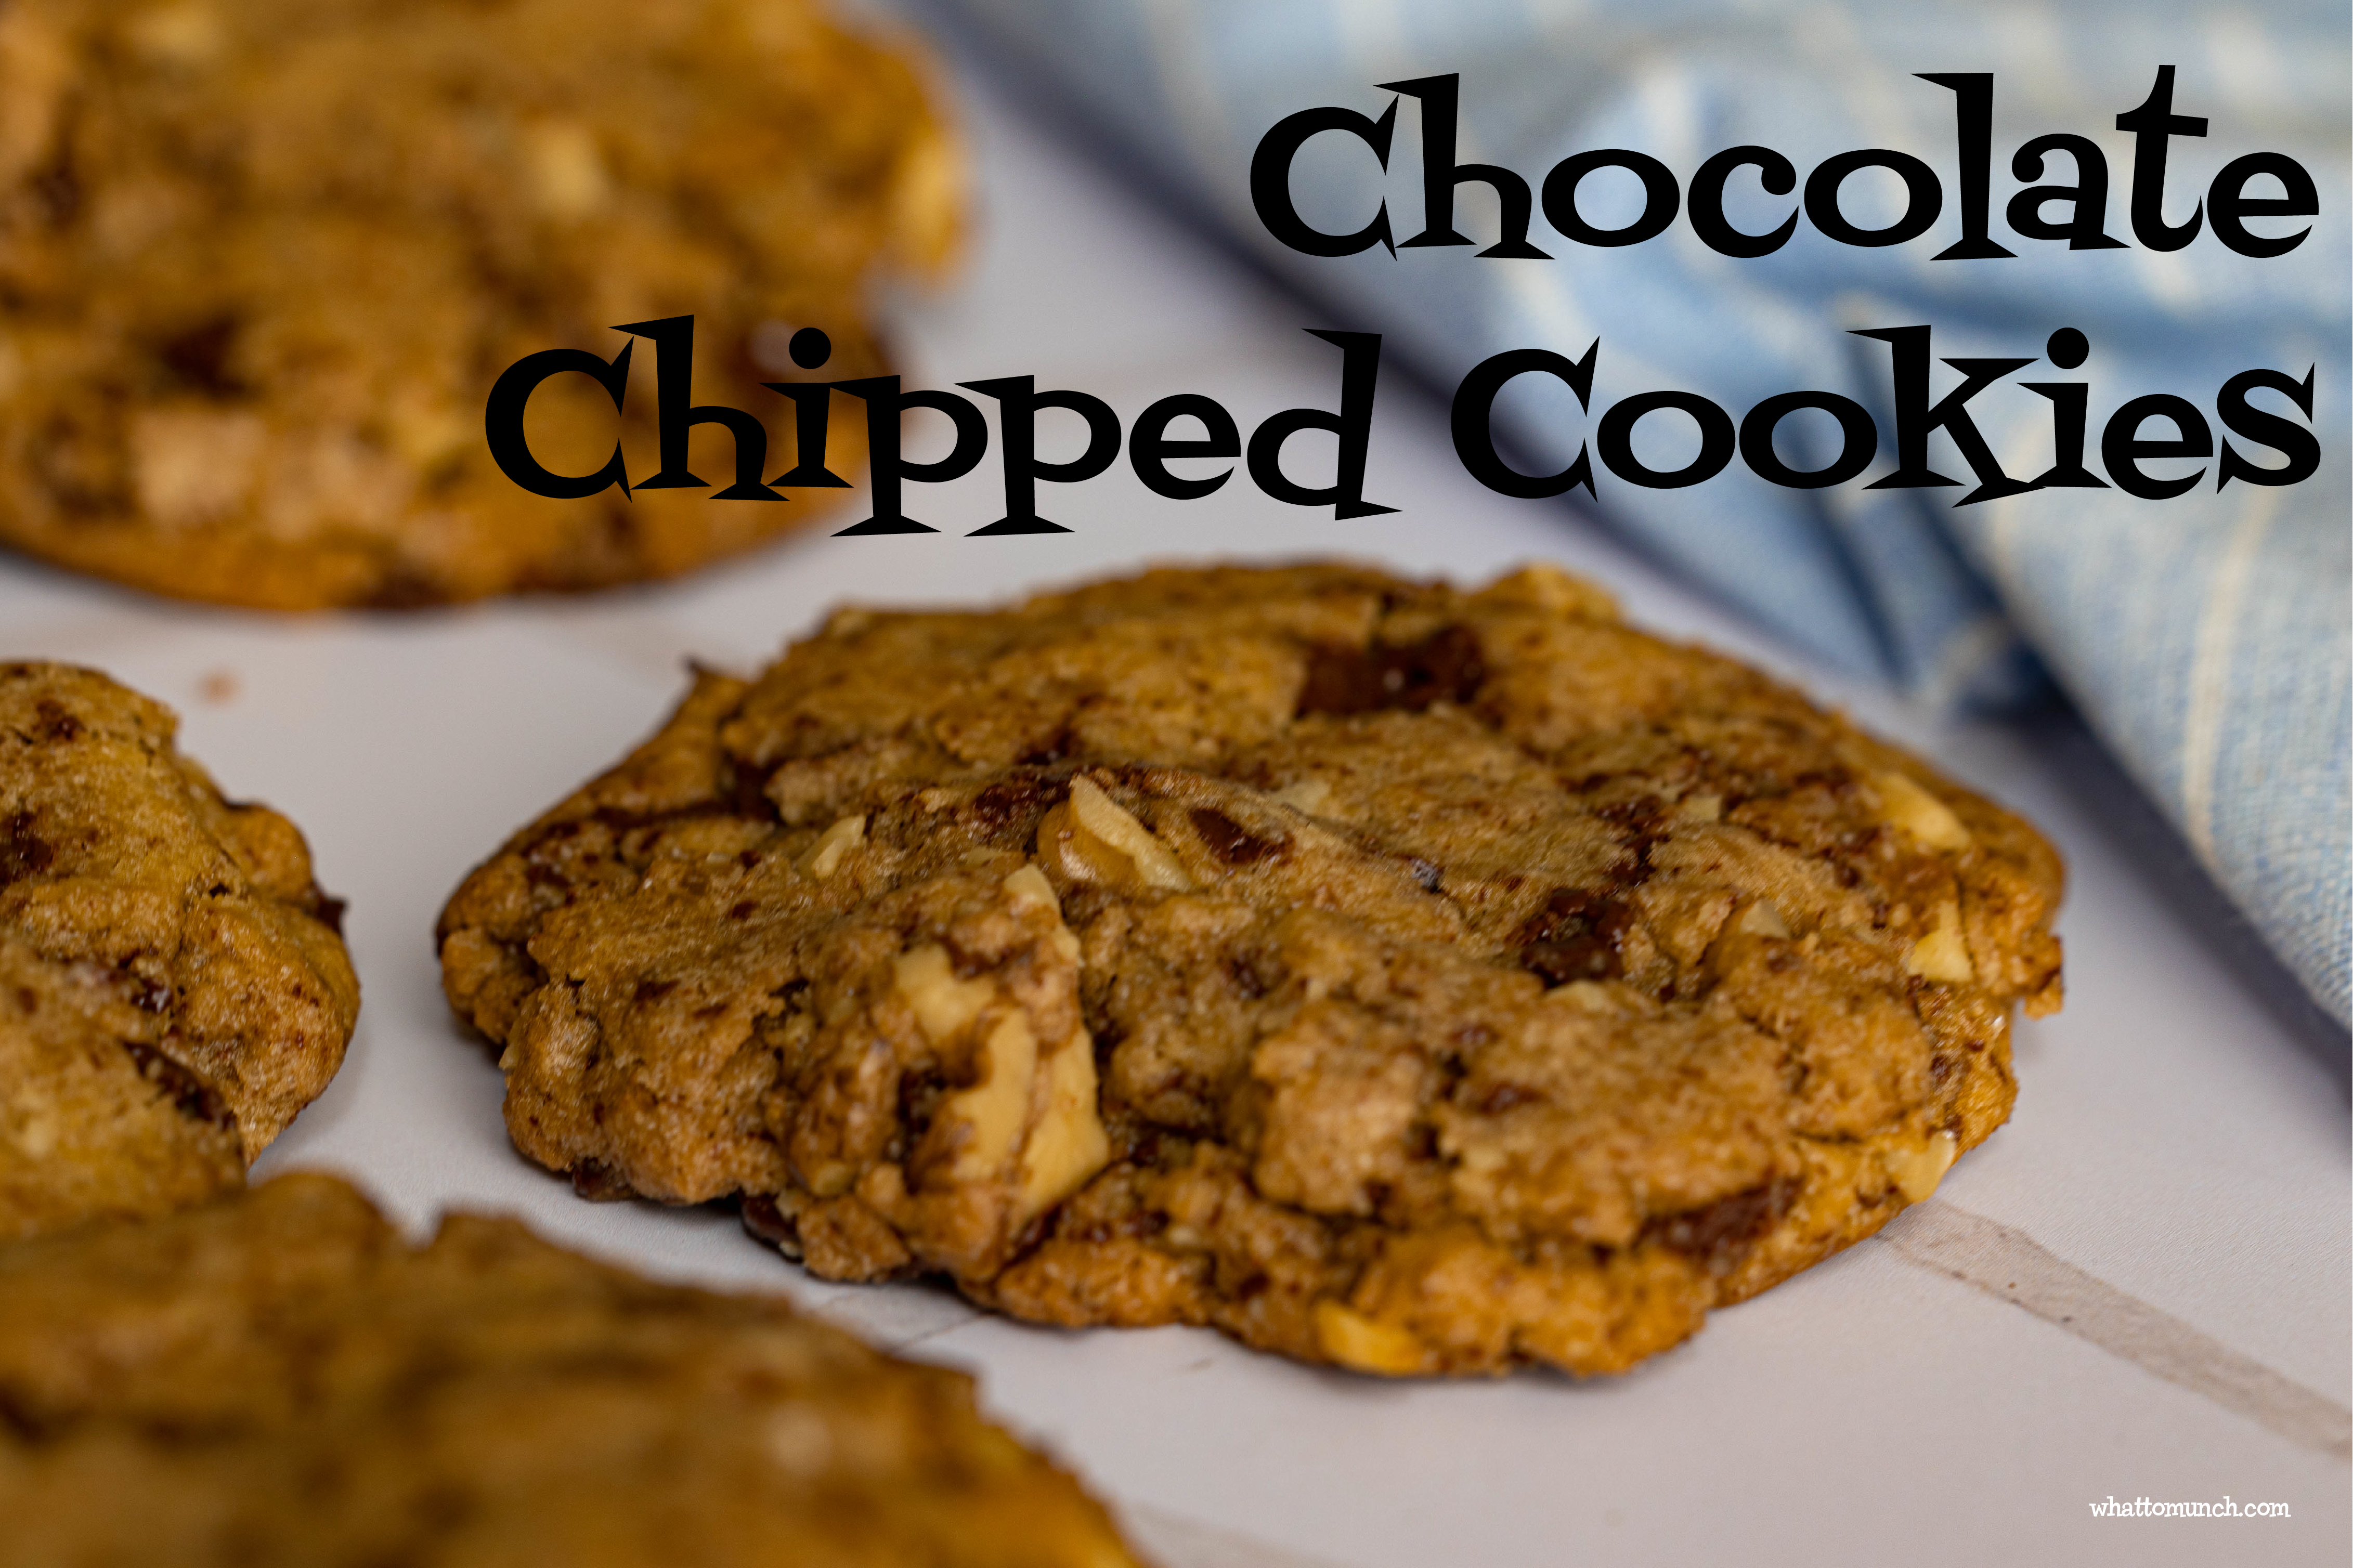 Chocolate Chipped Cookies